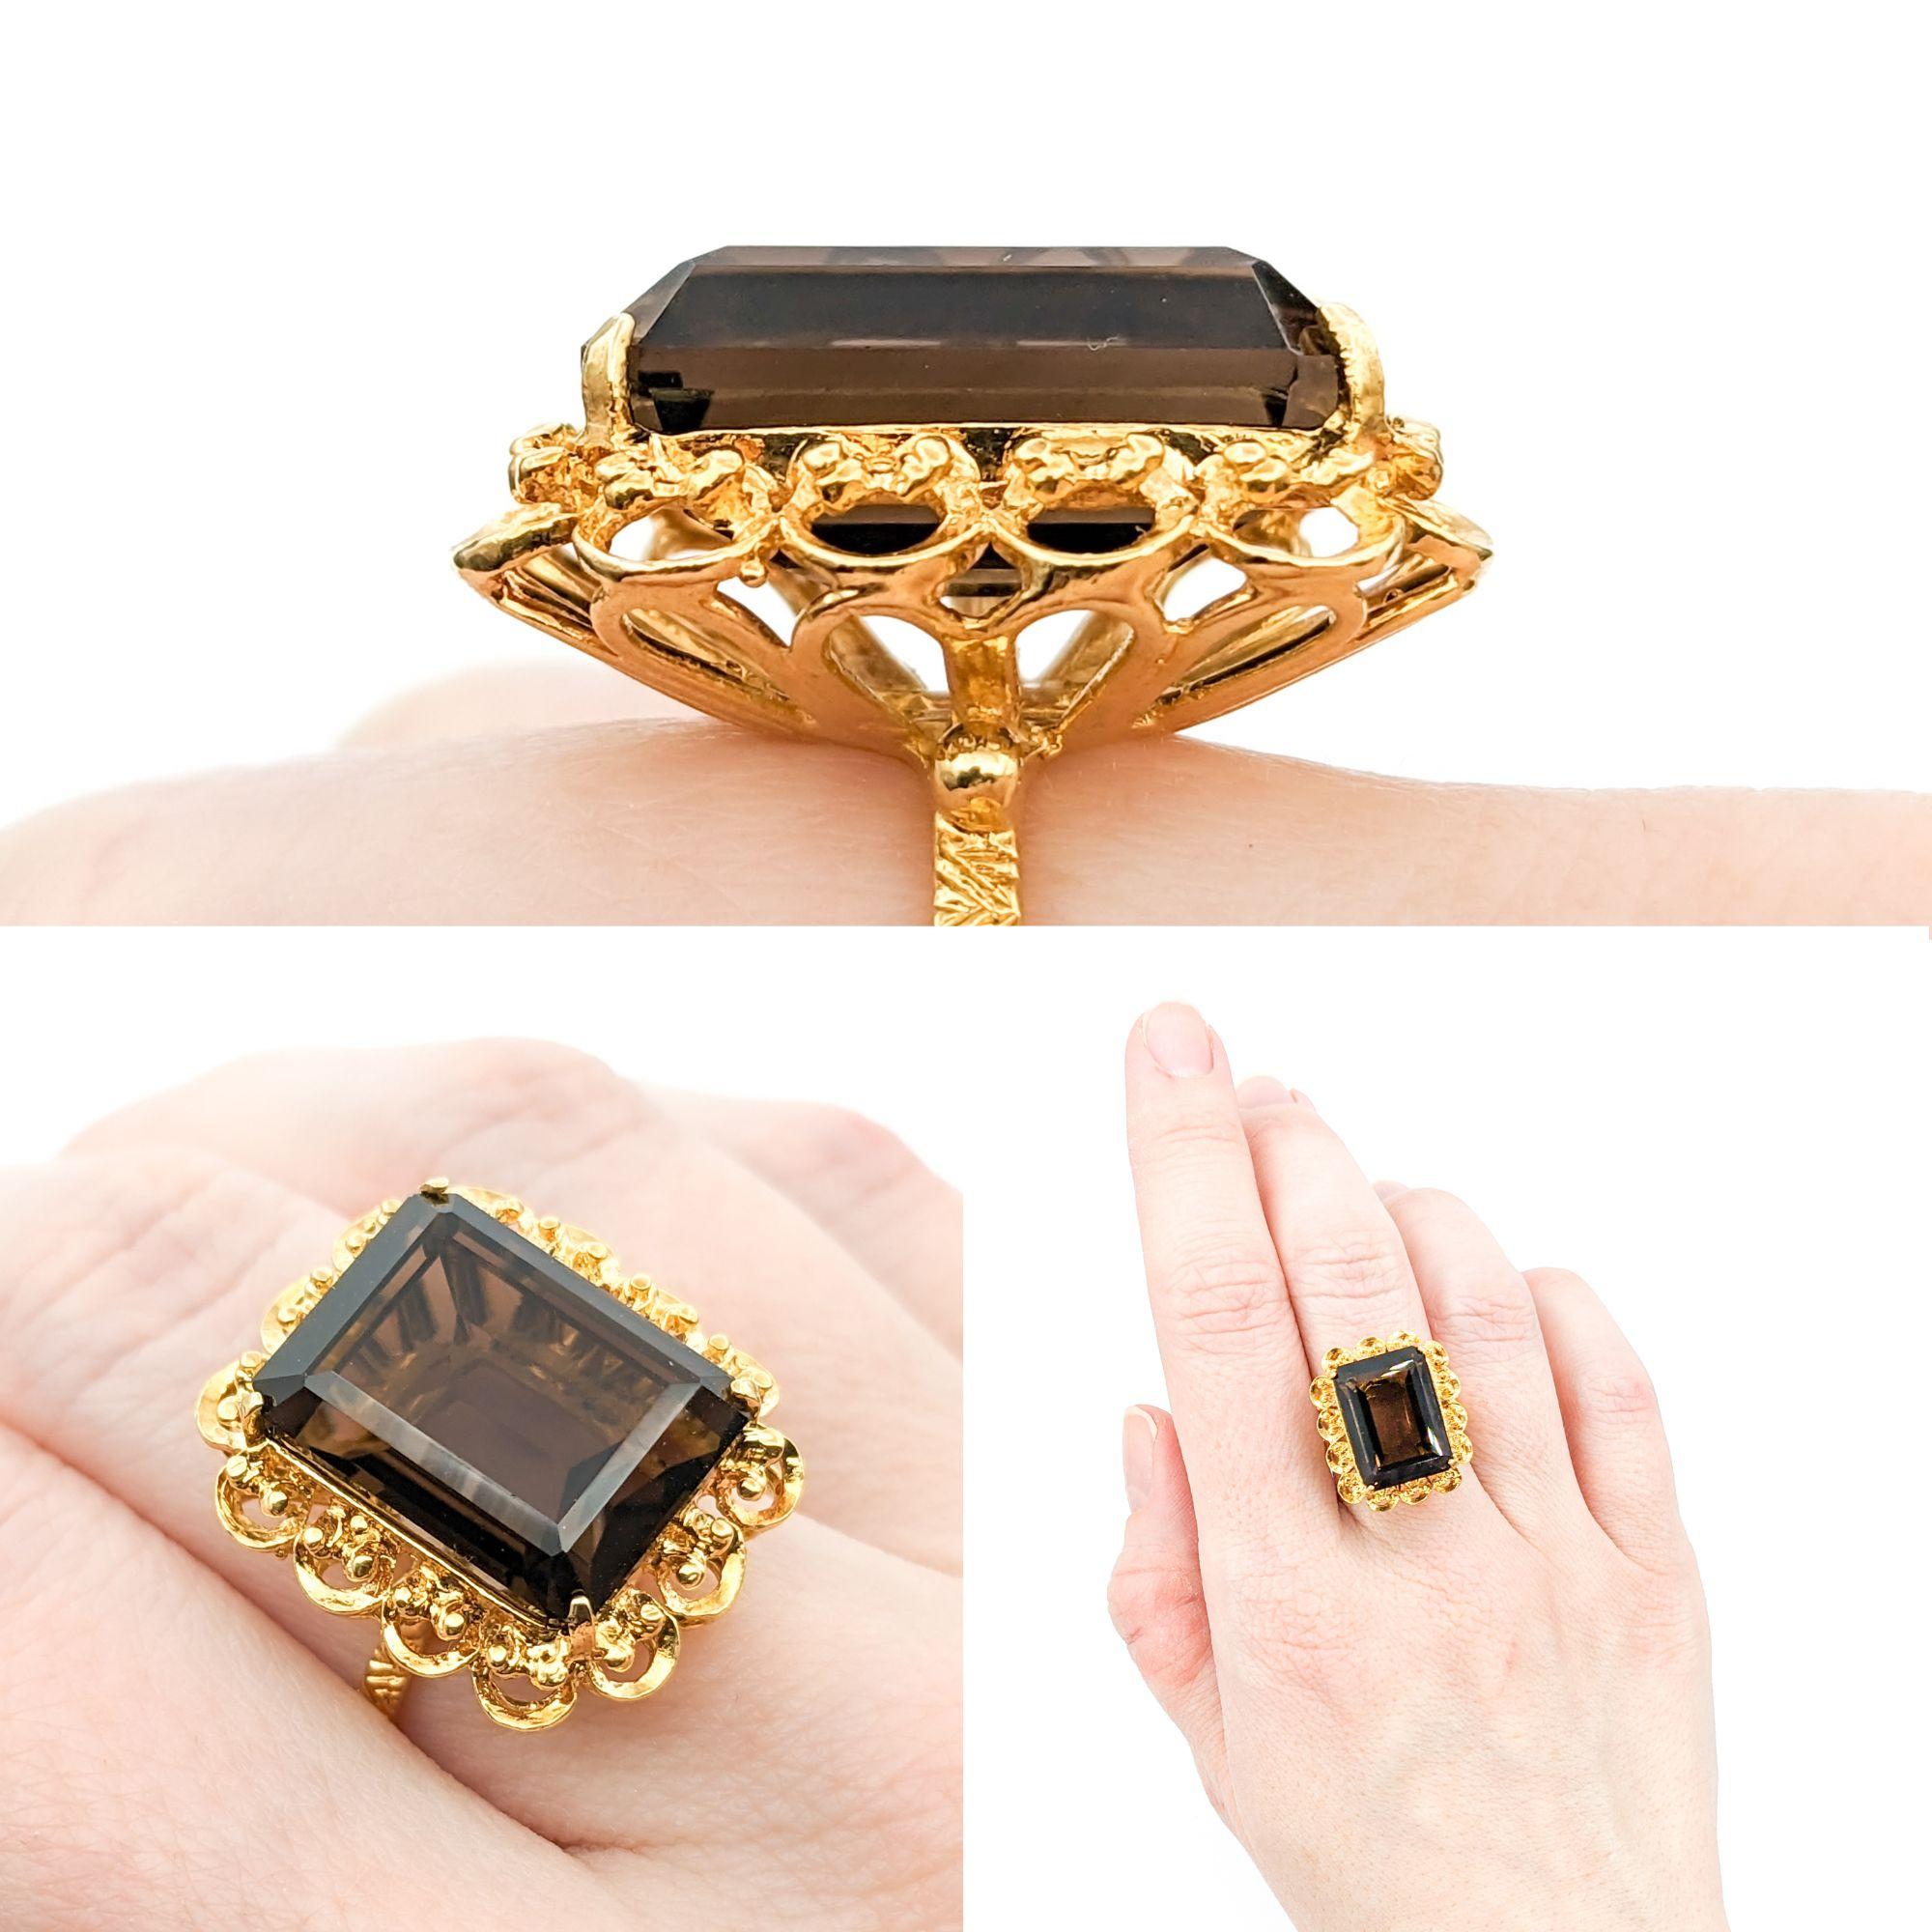 Elaborate 18k Smoky Quartz Cocktail Ring

Crafted in 18k yellow gold, this ring showcases a mesmerizing 16x12mm Smoky Quartz at its center. The warm and alluring Smoky Quartz gemstone exudes a captivating charm, creating an exquisite focal point for